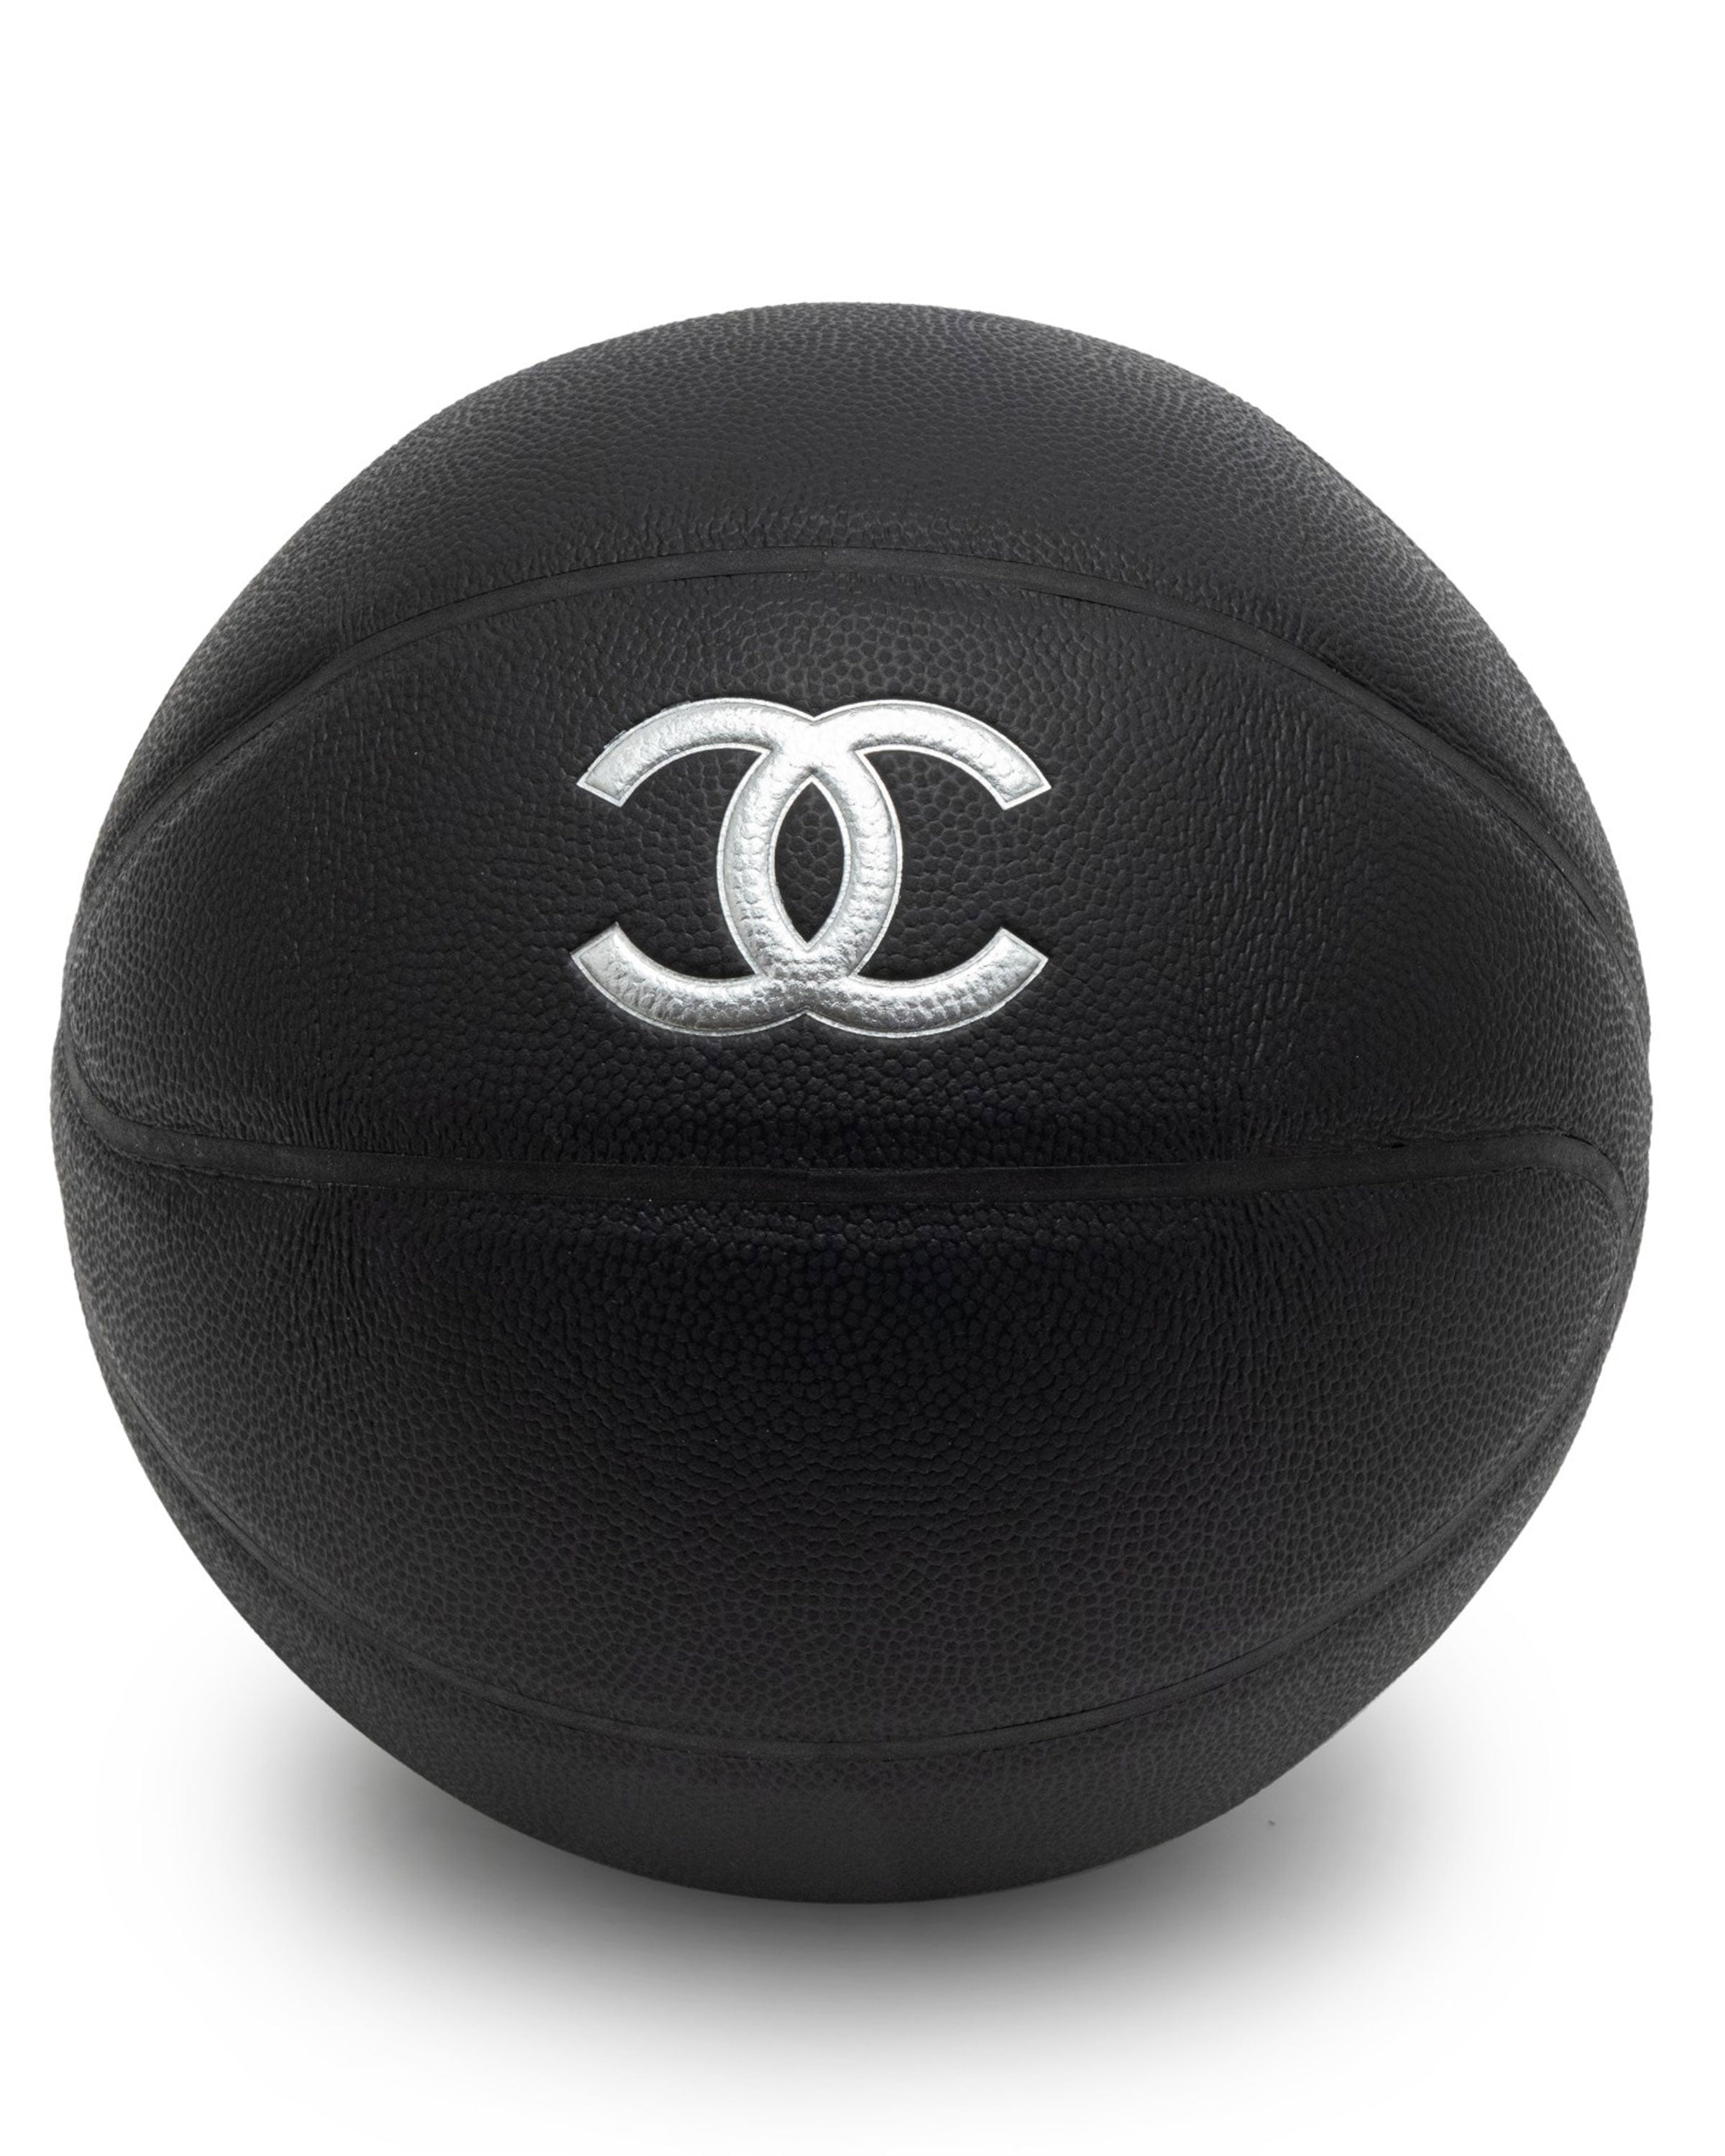 Leather "CC" Basketball & Carrying Handle